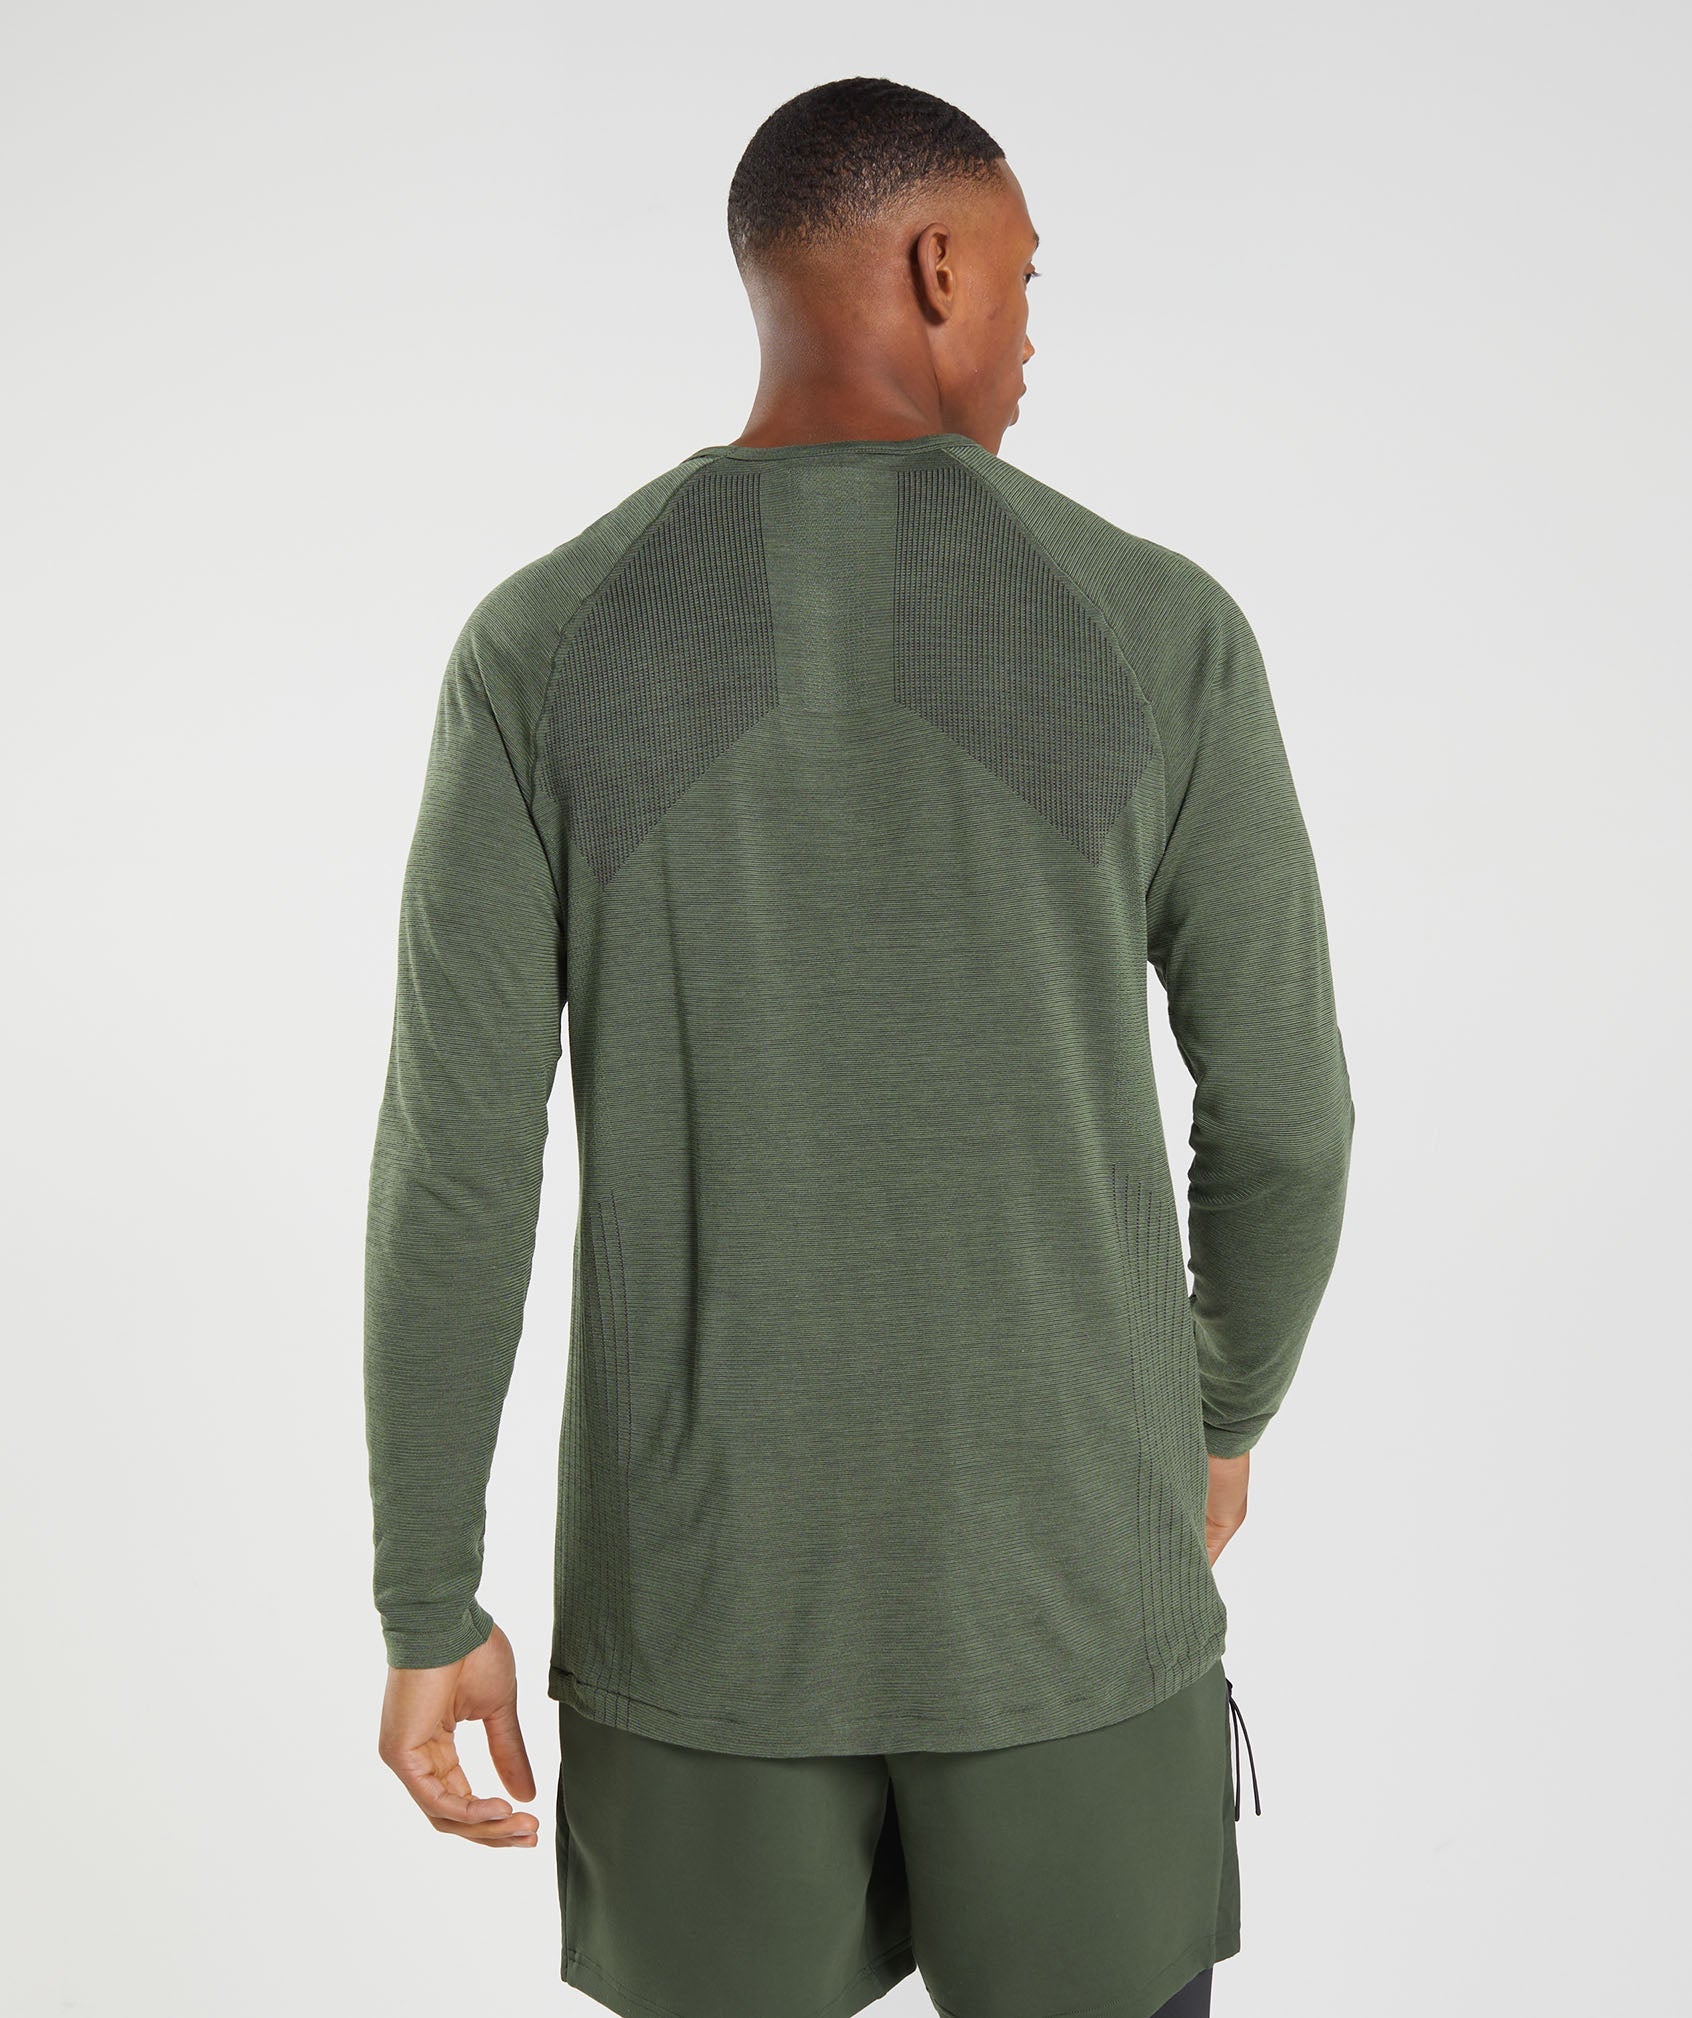 Retake Seamless Long Sleeve T-Shirt in Core Olive - view 2